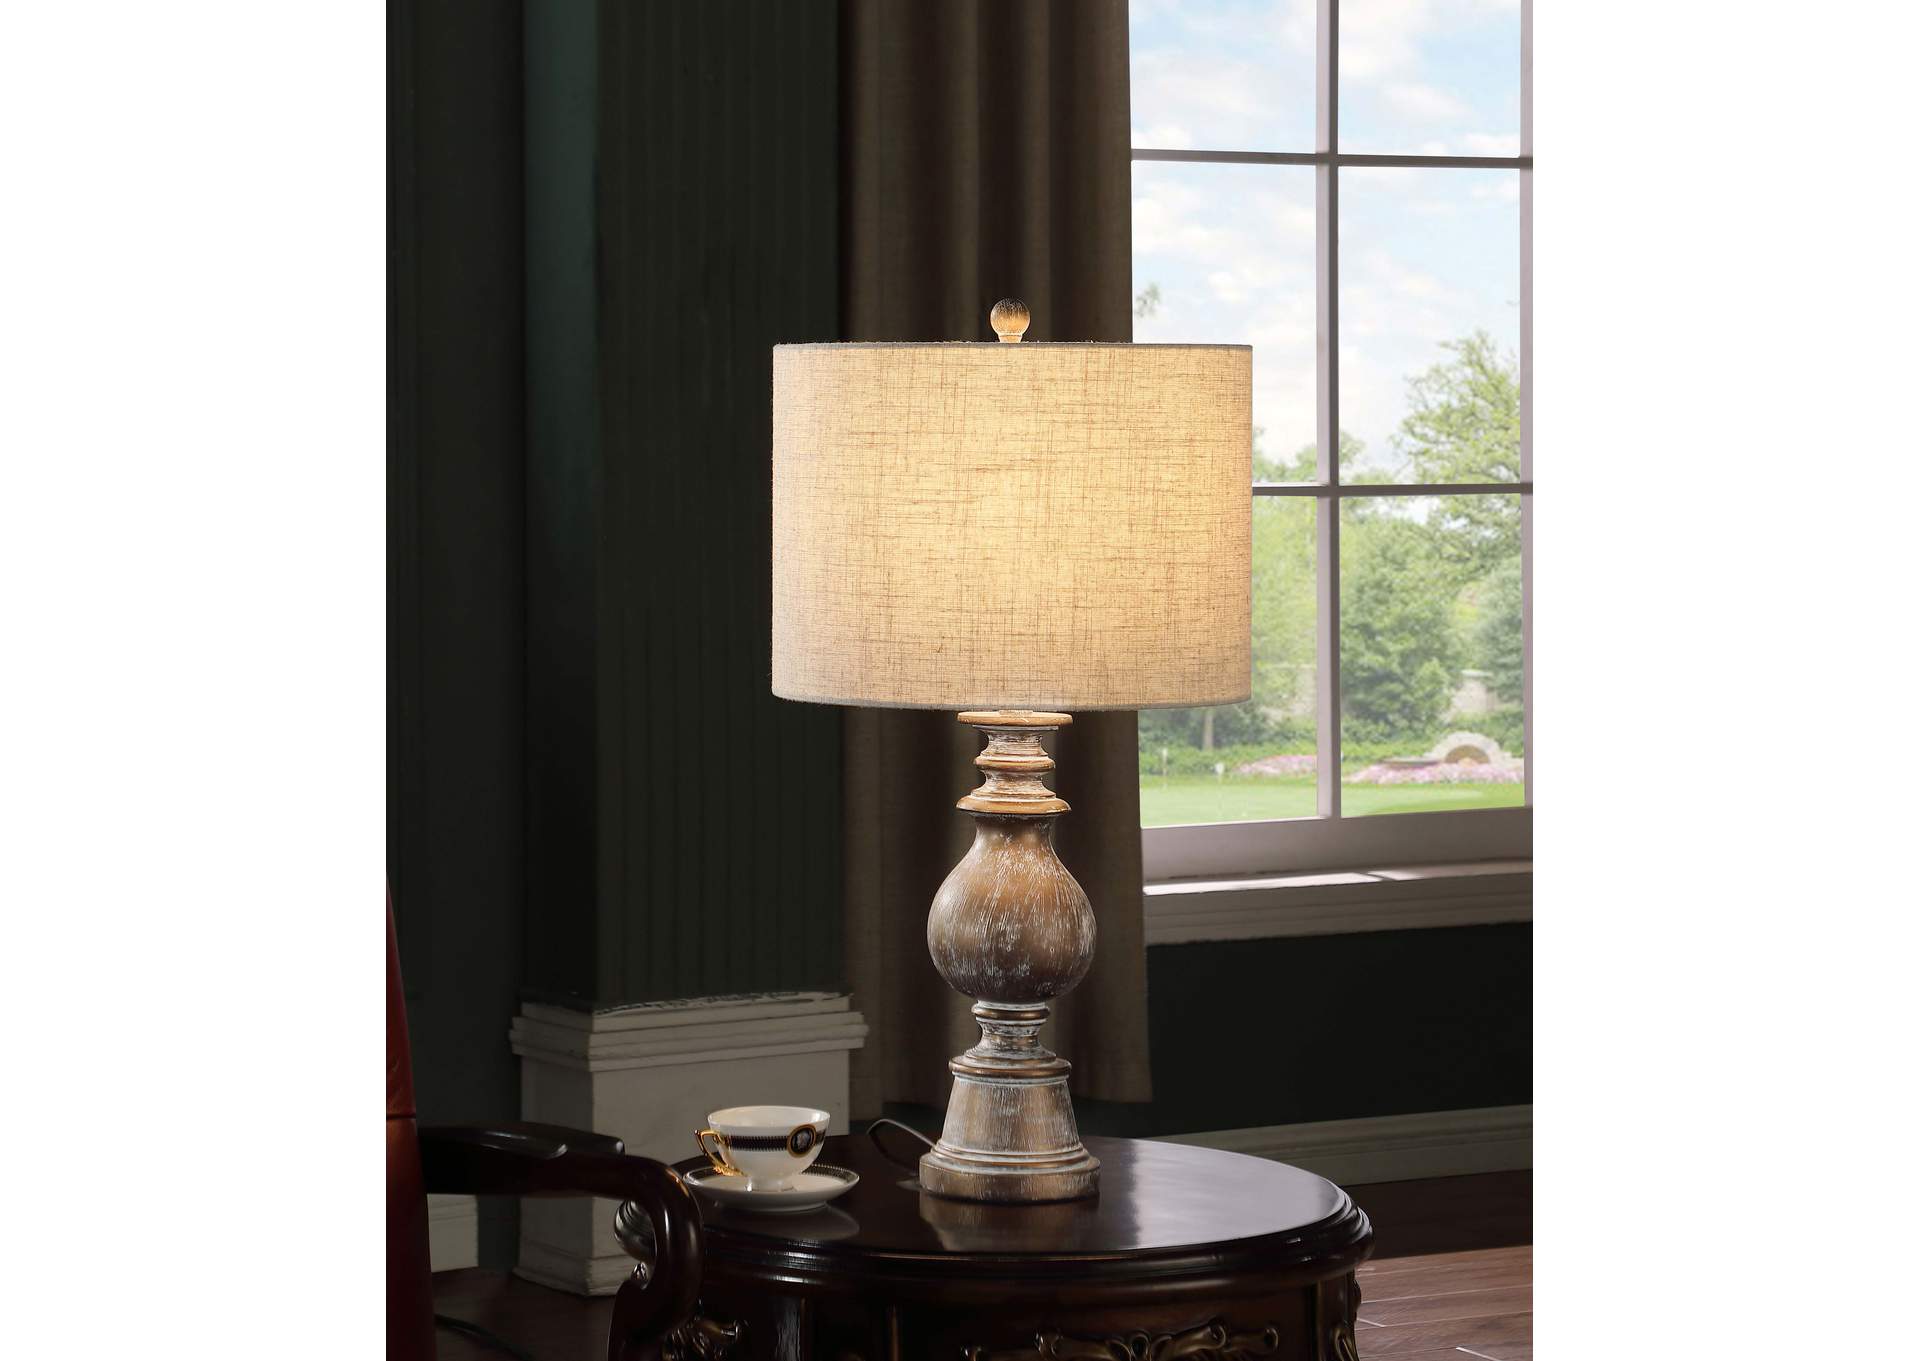 Brie Drum Shade Table Lamp Oatmeal and Antique Gold,Coaster Furniture